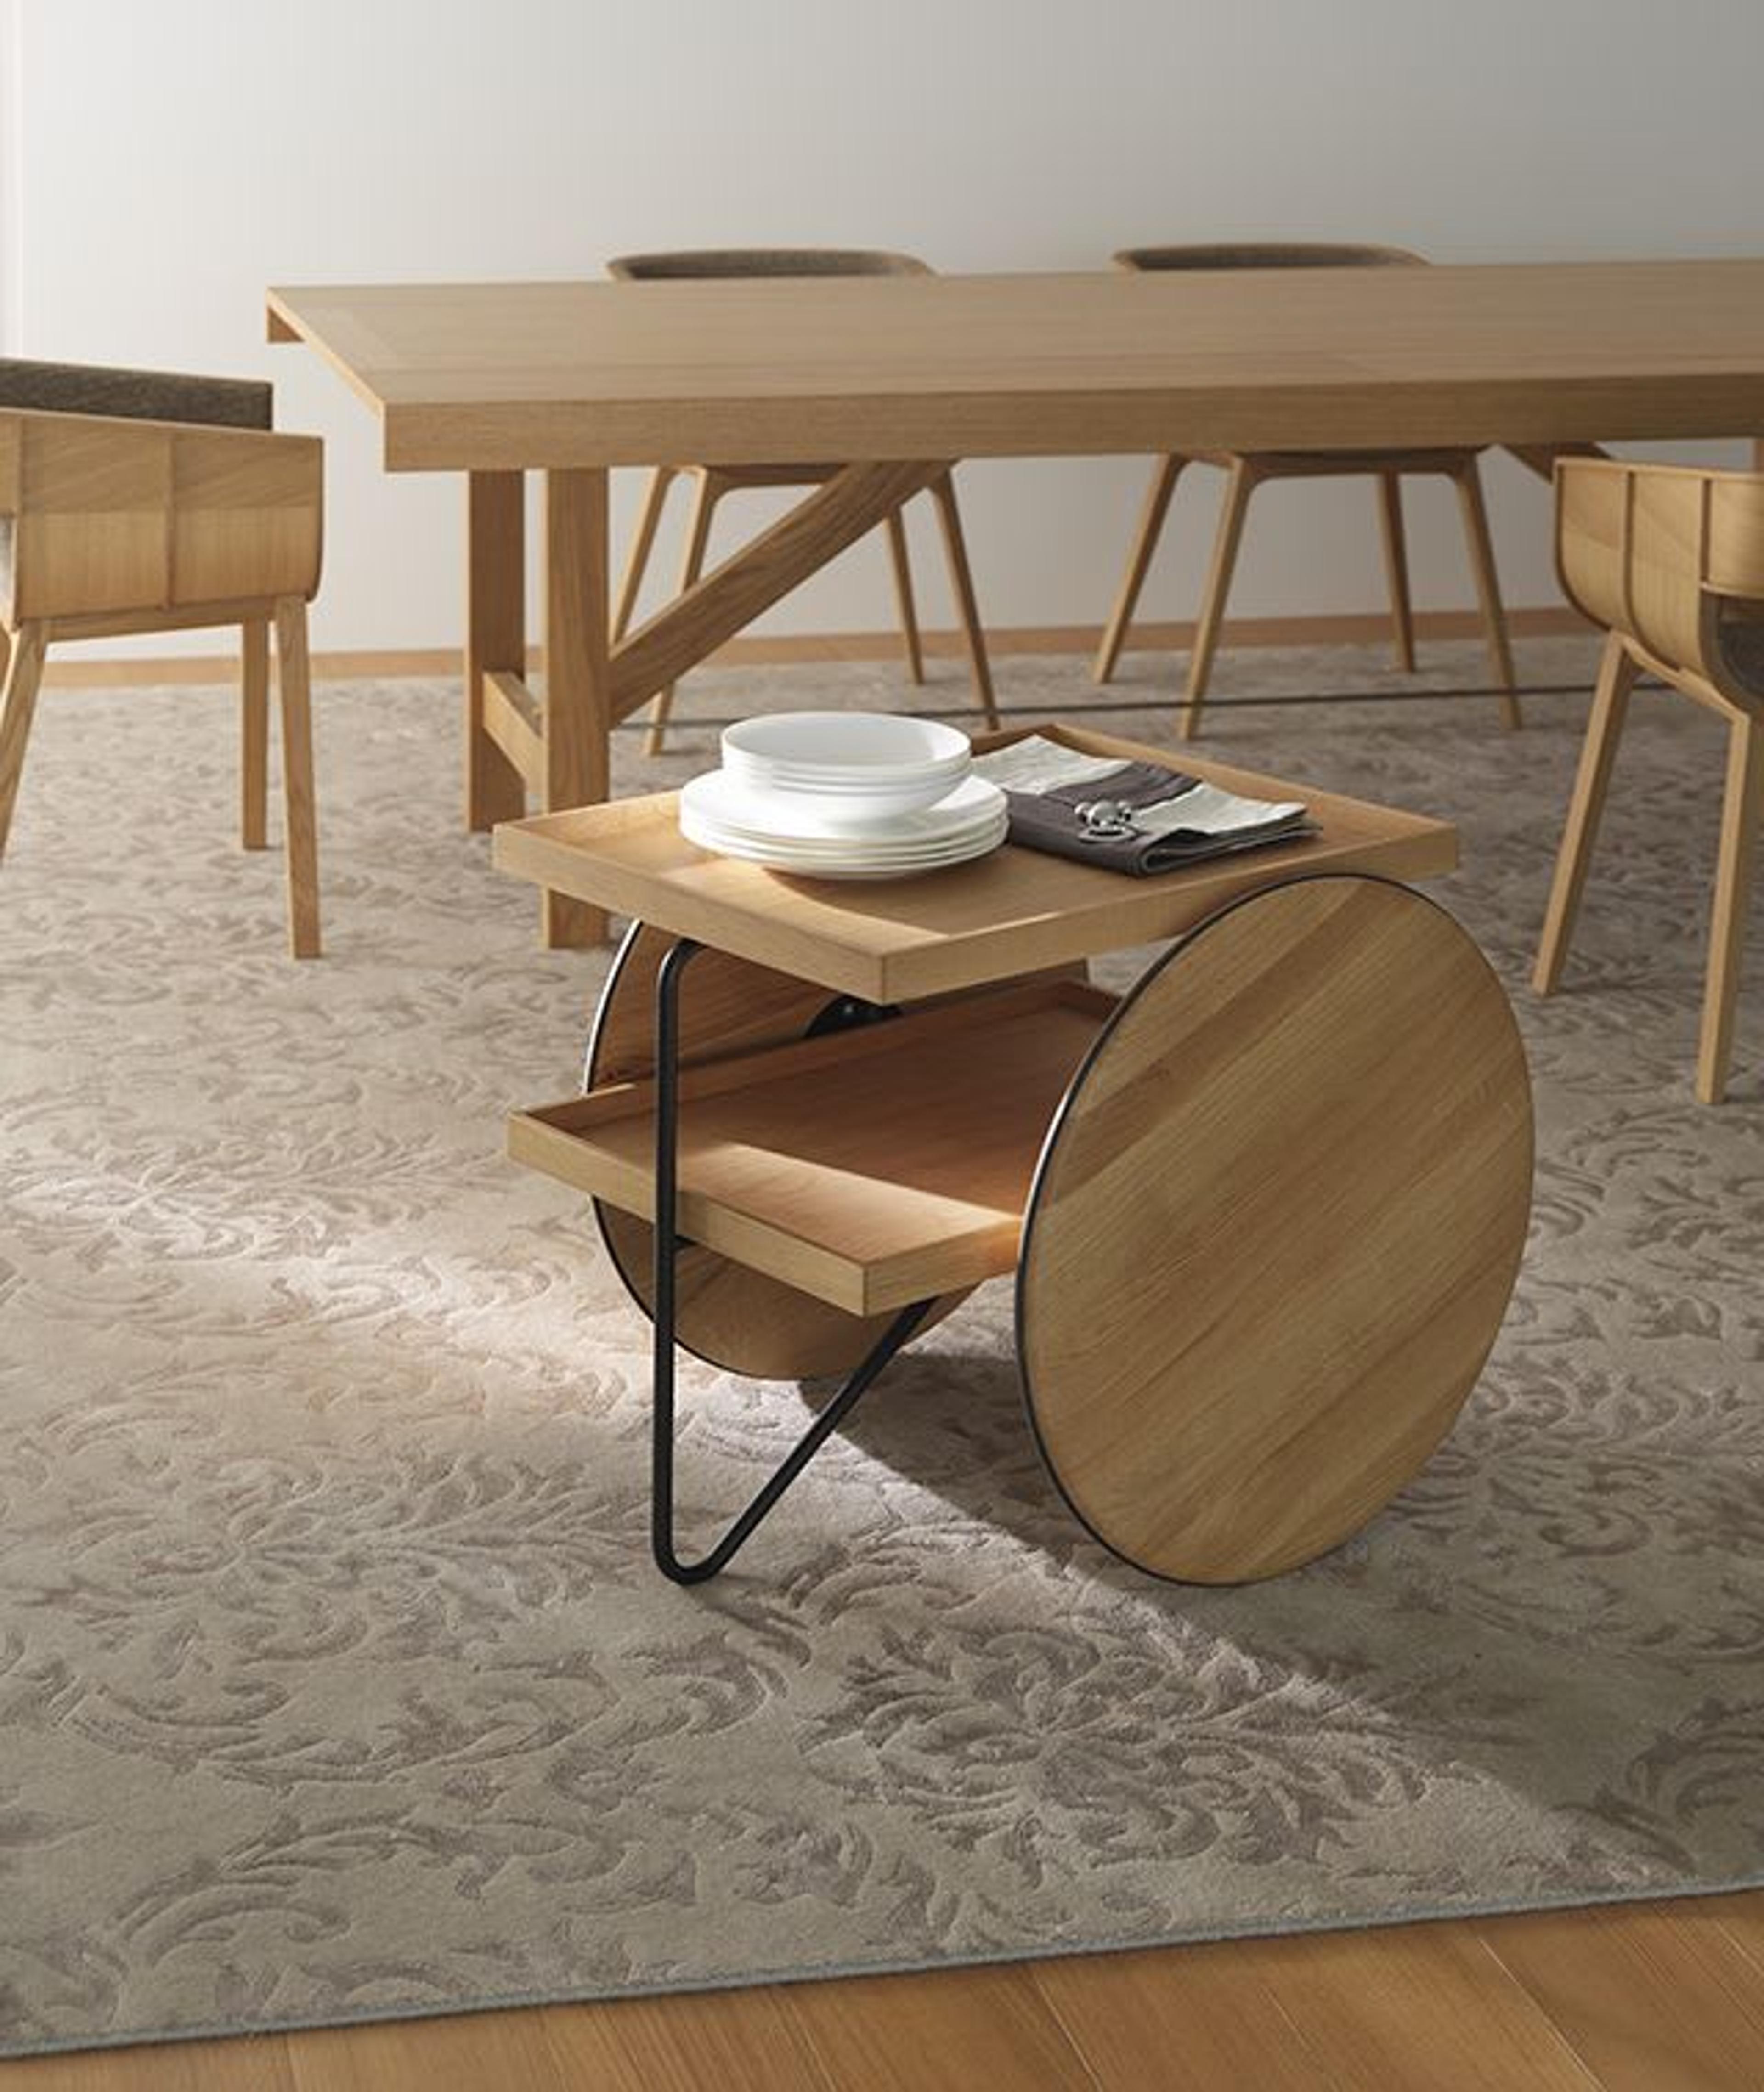 Chariot Wood Trolley table by Gamfratesi for Casamania